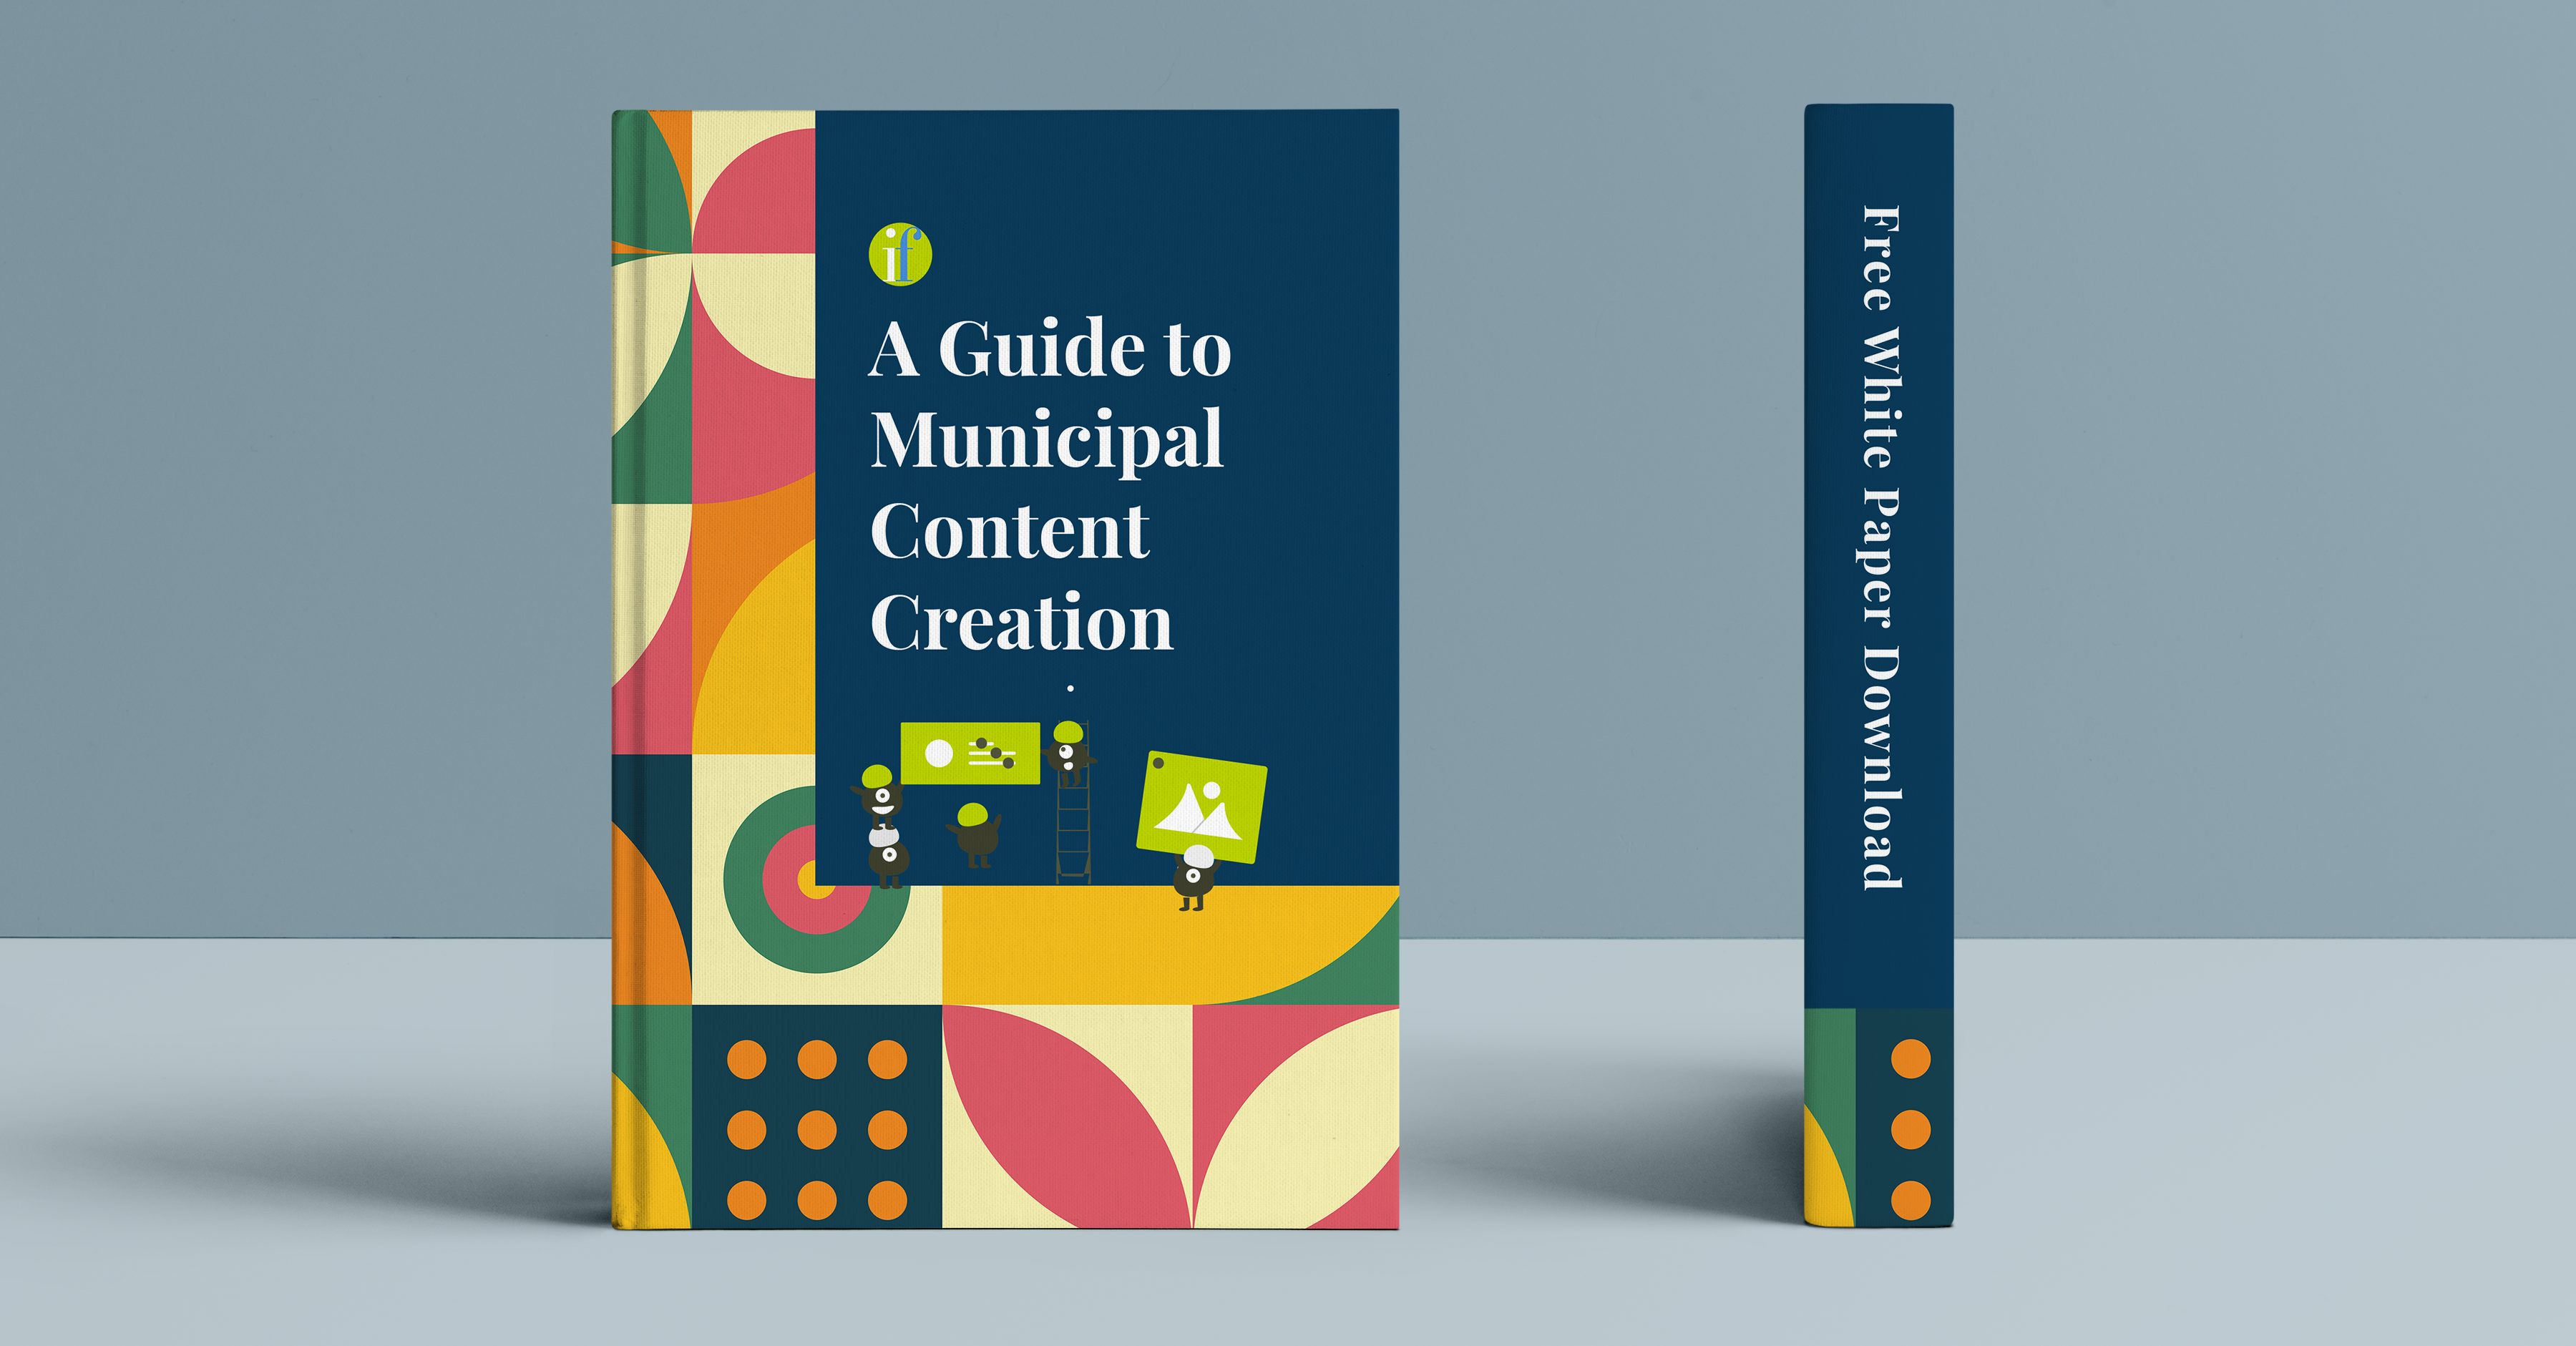 Book Cover and Spine that Read "A Guide to Municipal Content Creation, Free White Paper Download"